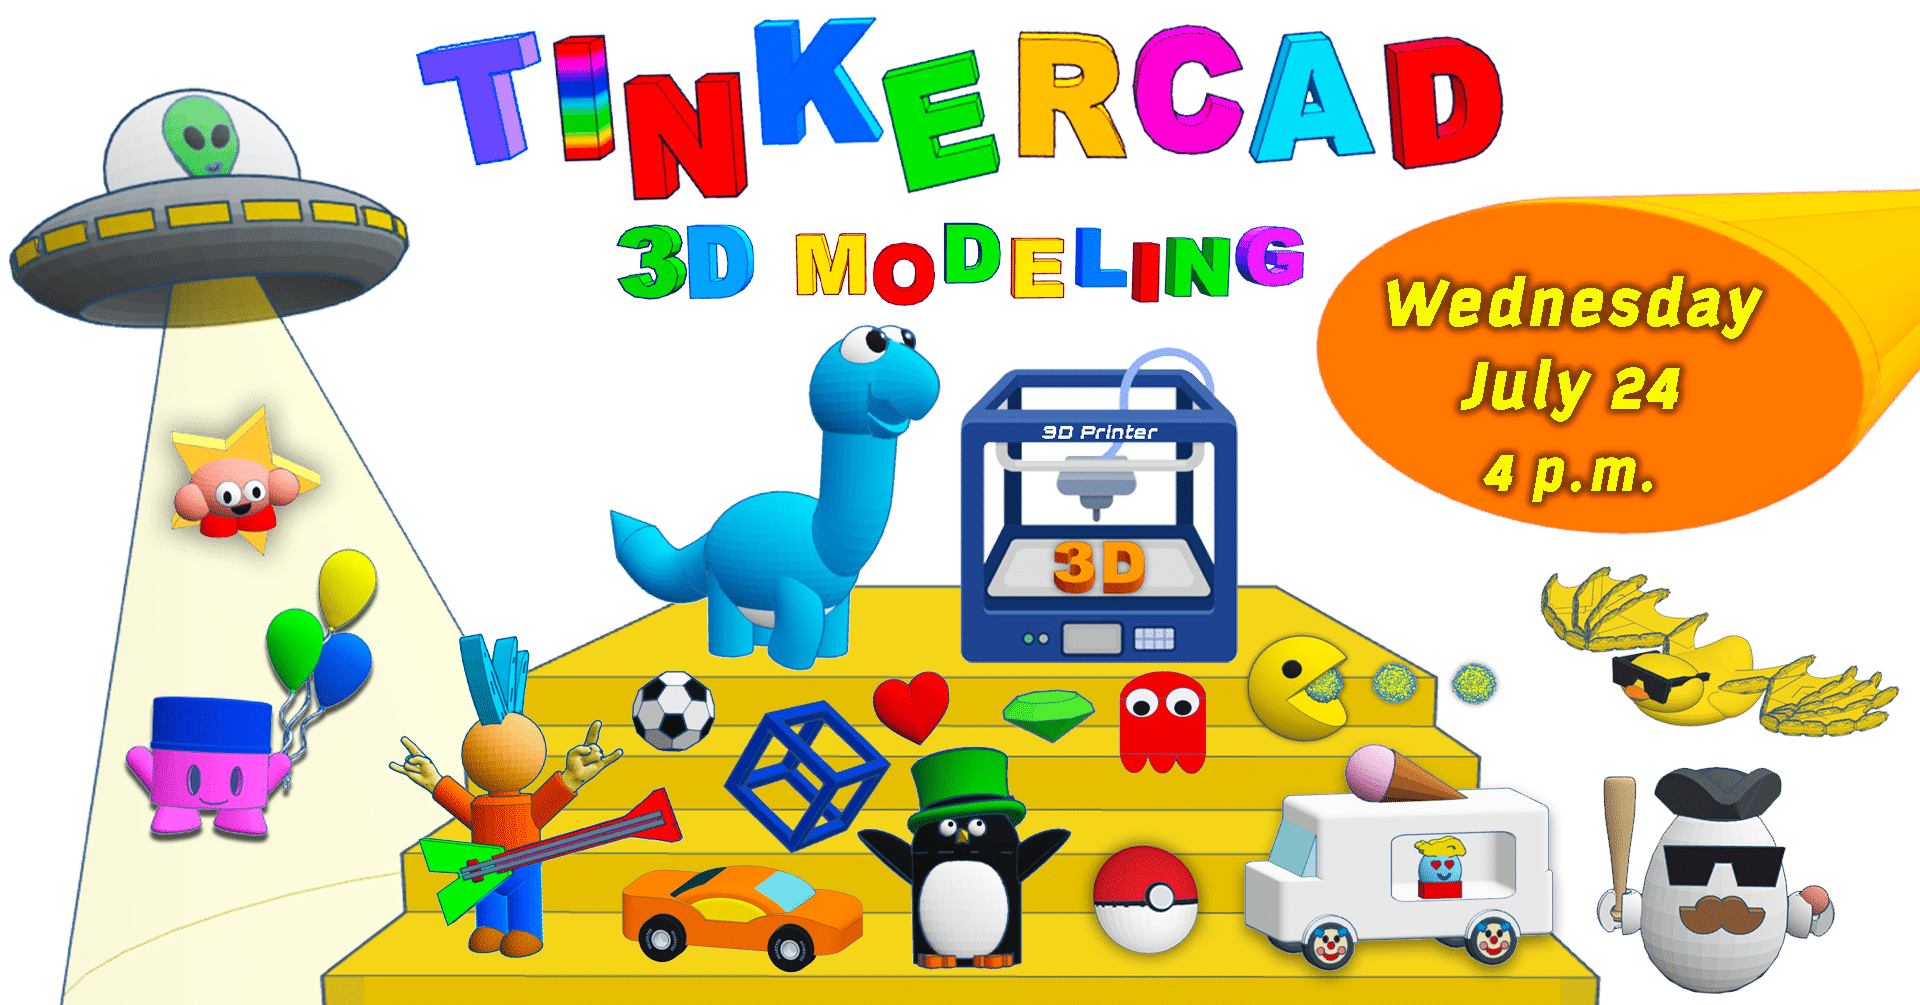 Tinkercad 3D modeling, Wednesday, July 24 at 4:00 pm